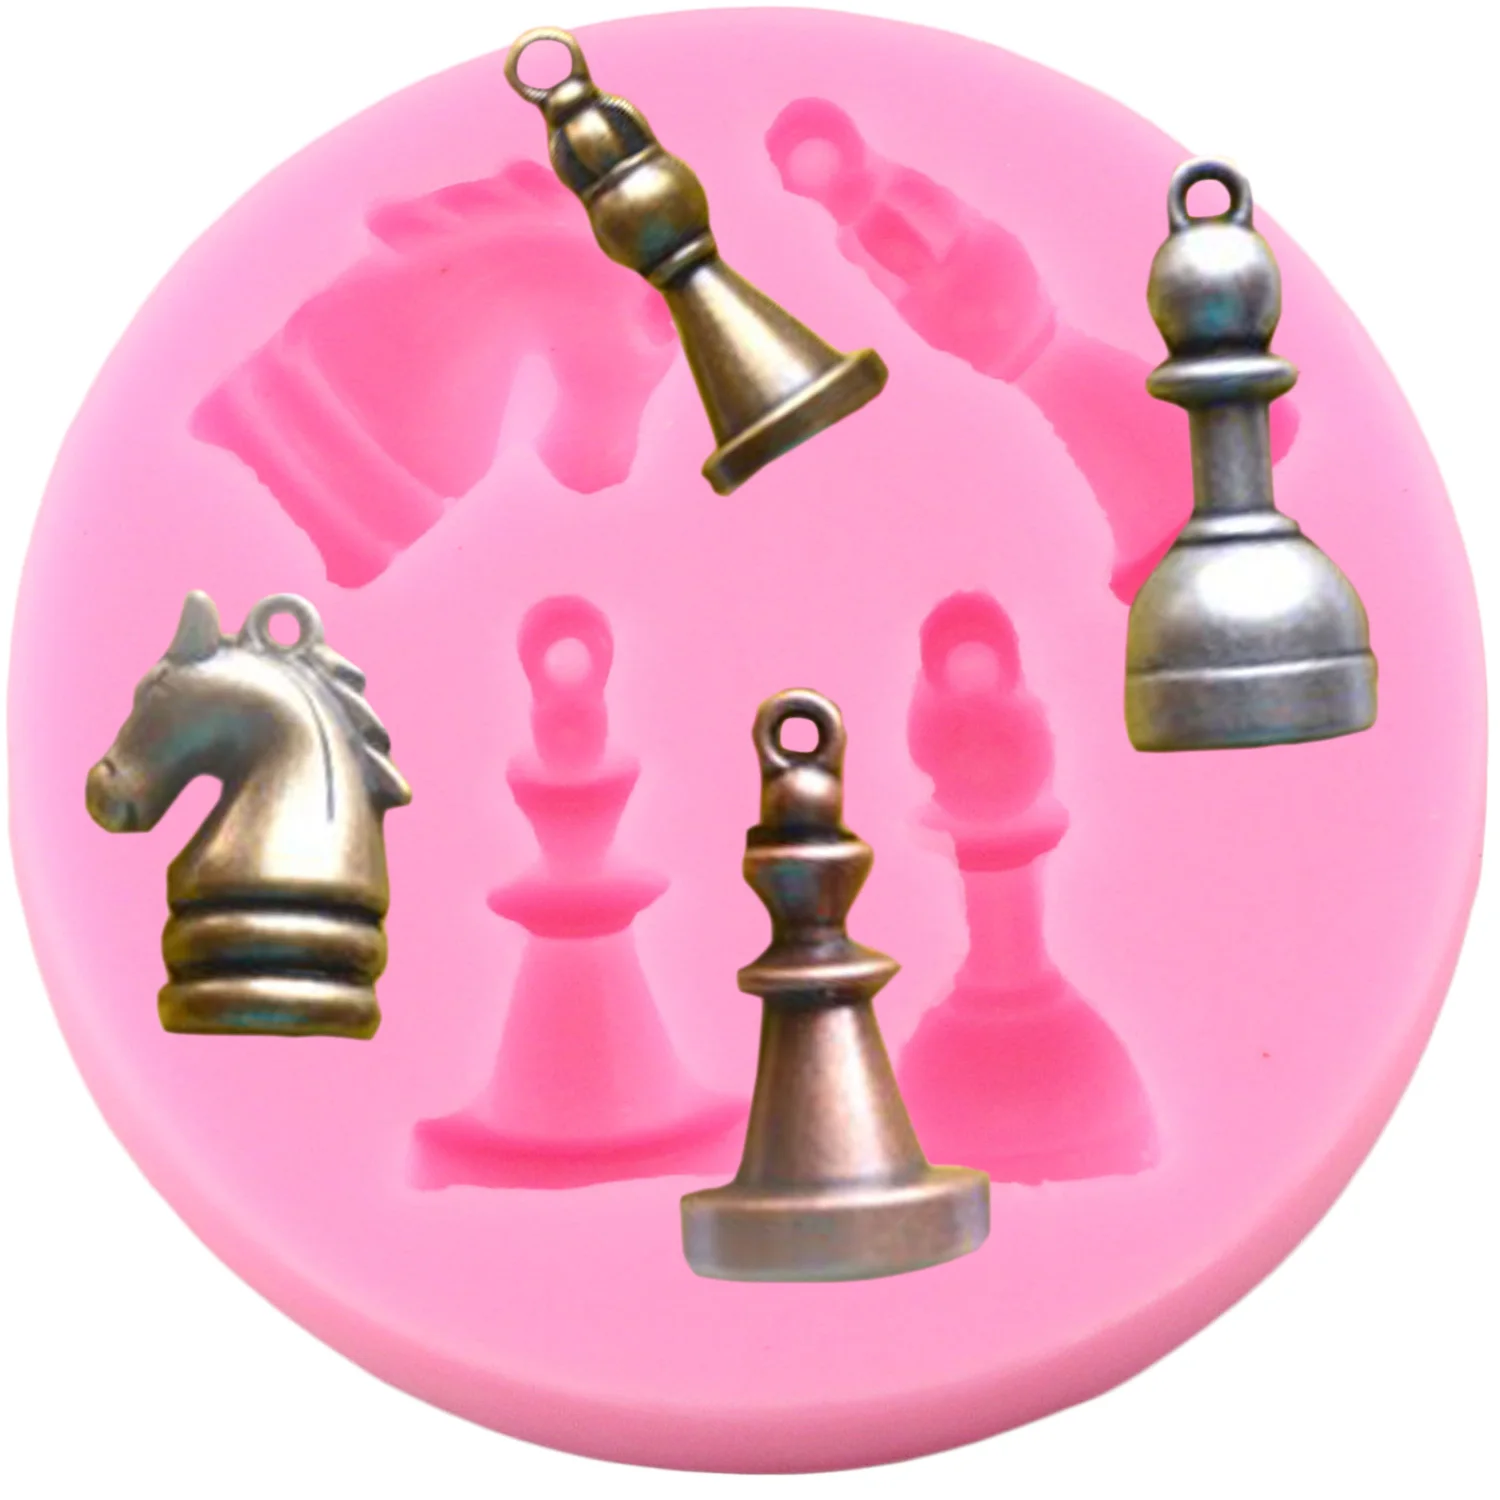 

3D Chess Silicone Fondant Mold Polymer Clay Resin Molds Cake Baking Decorating Tools Chocolate Candy Gumpaste Moulds